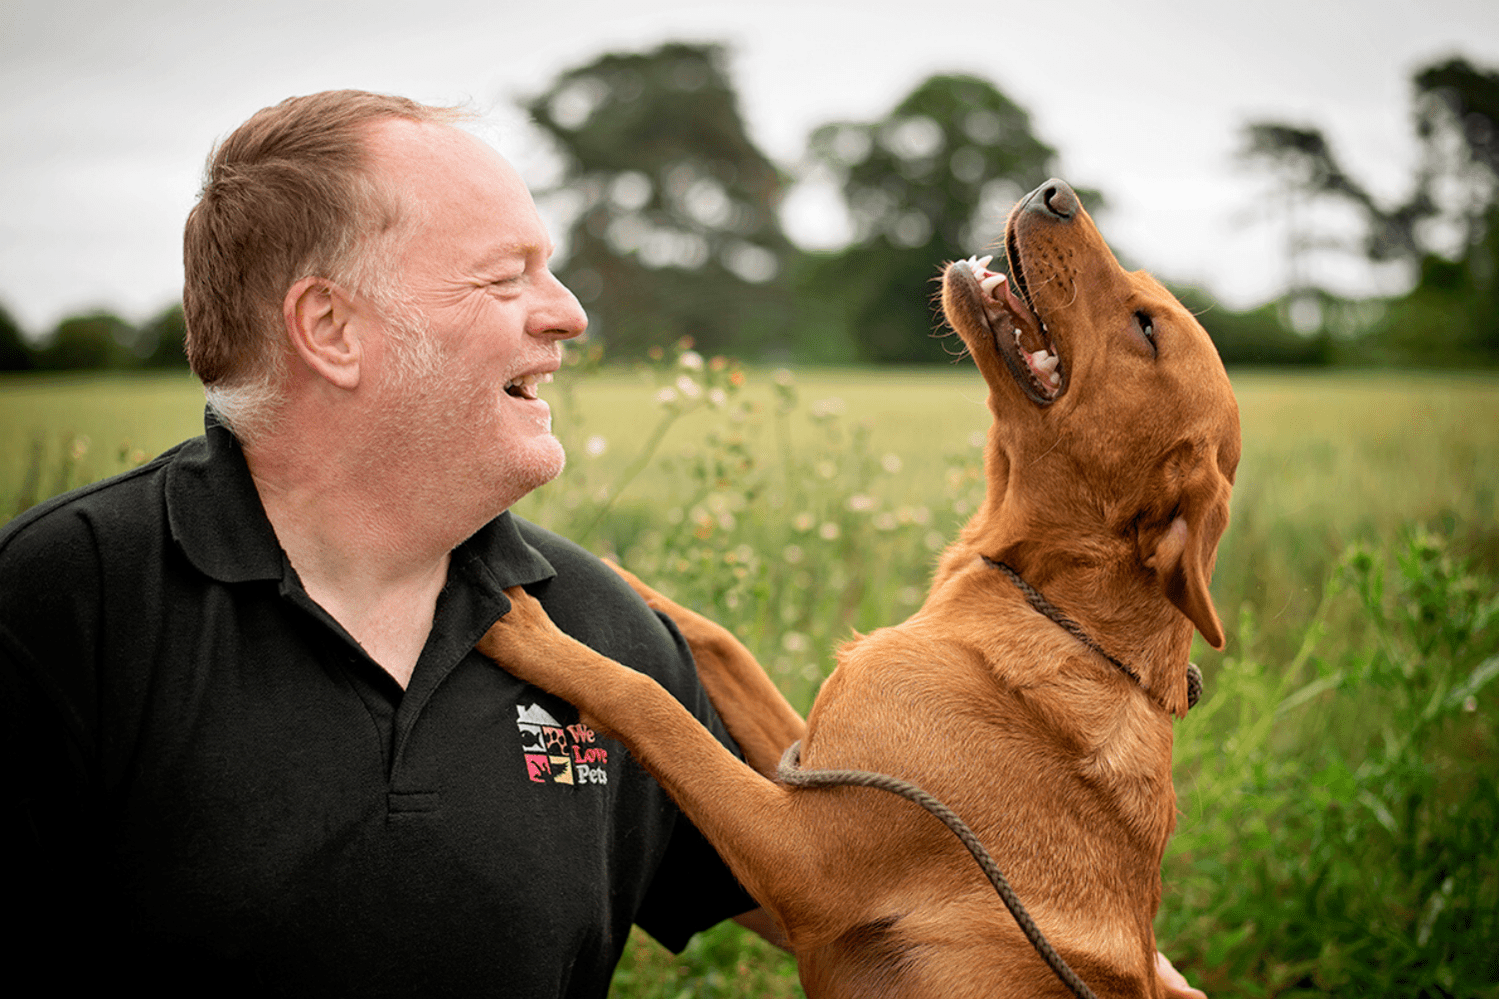 Man laughing with dog